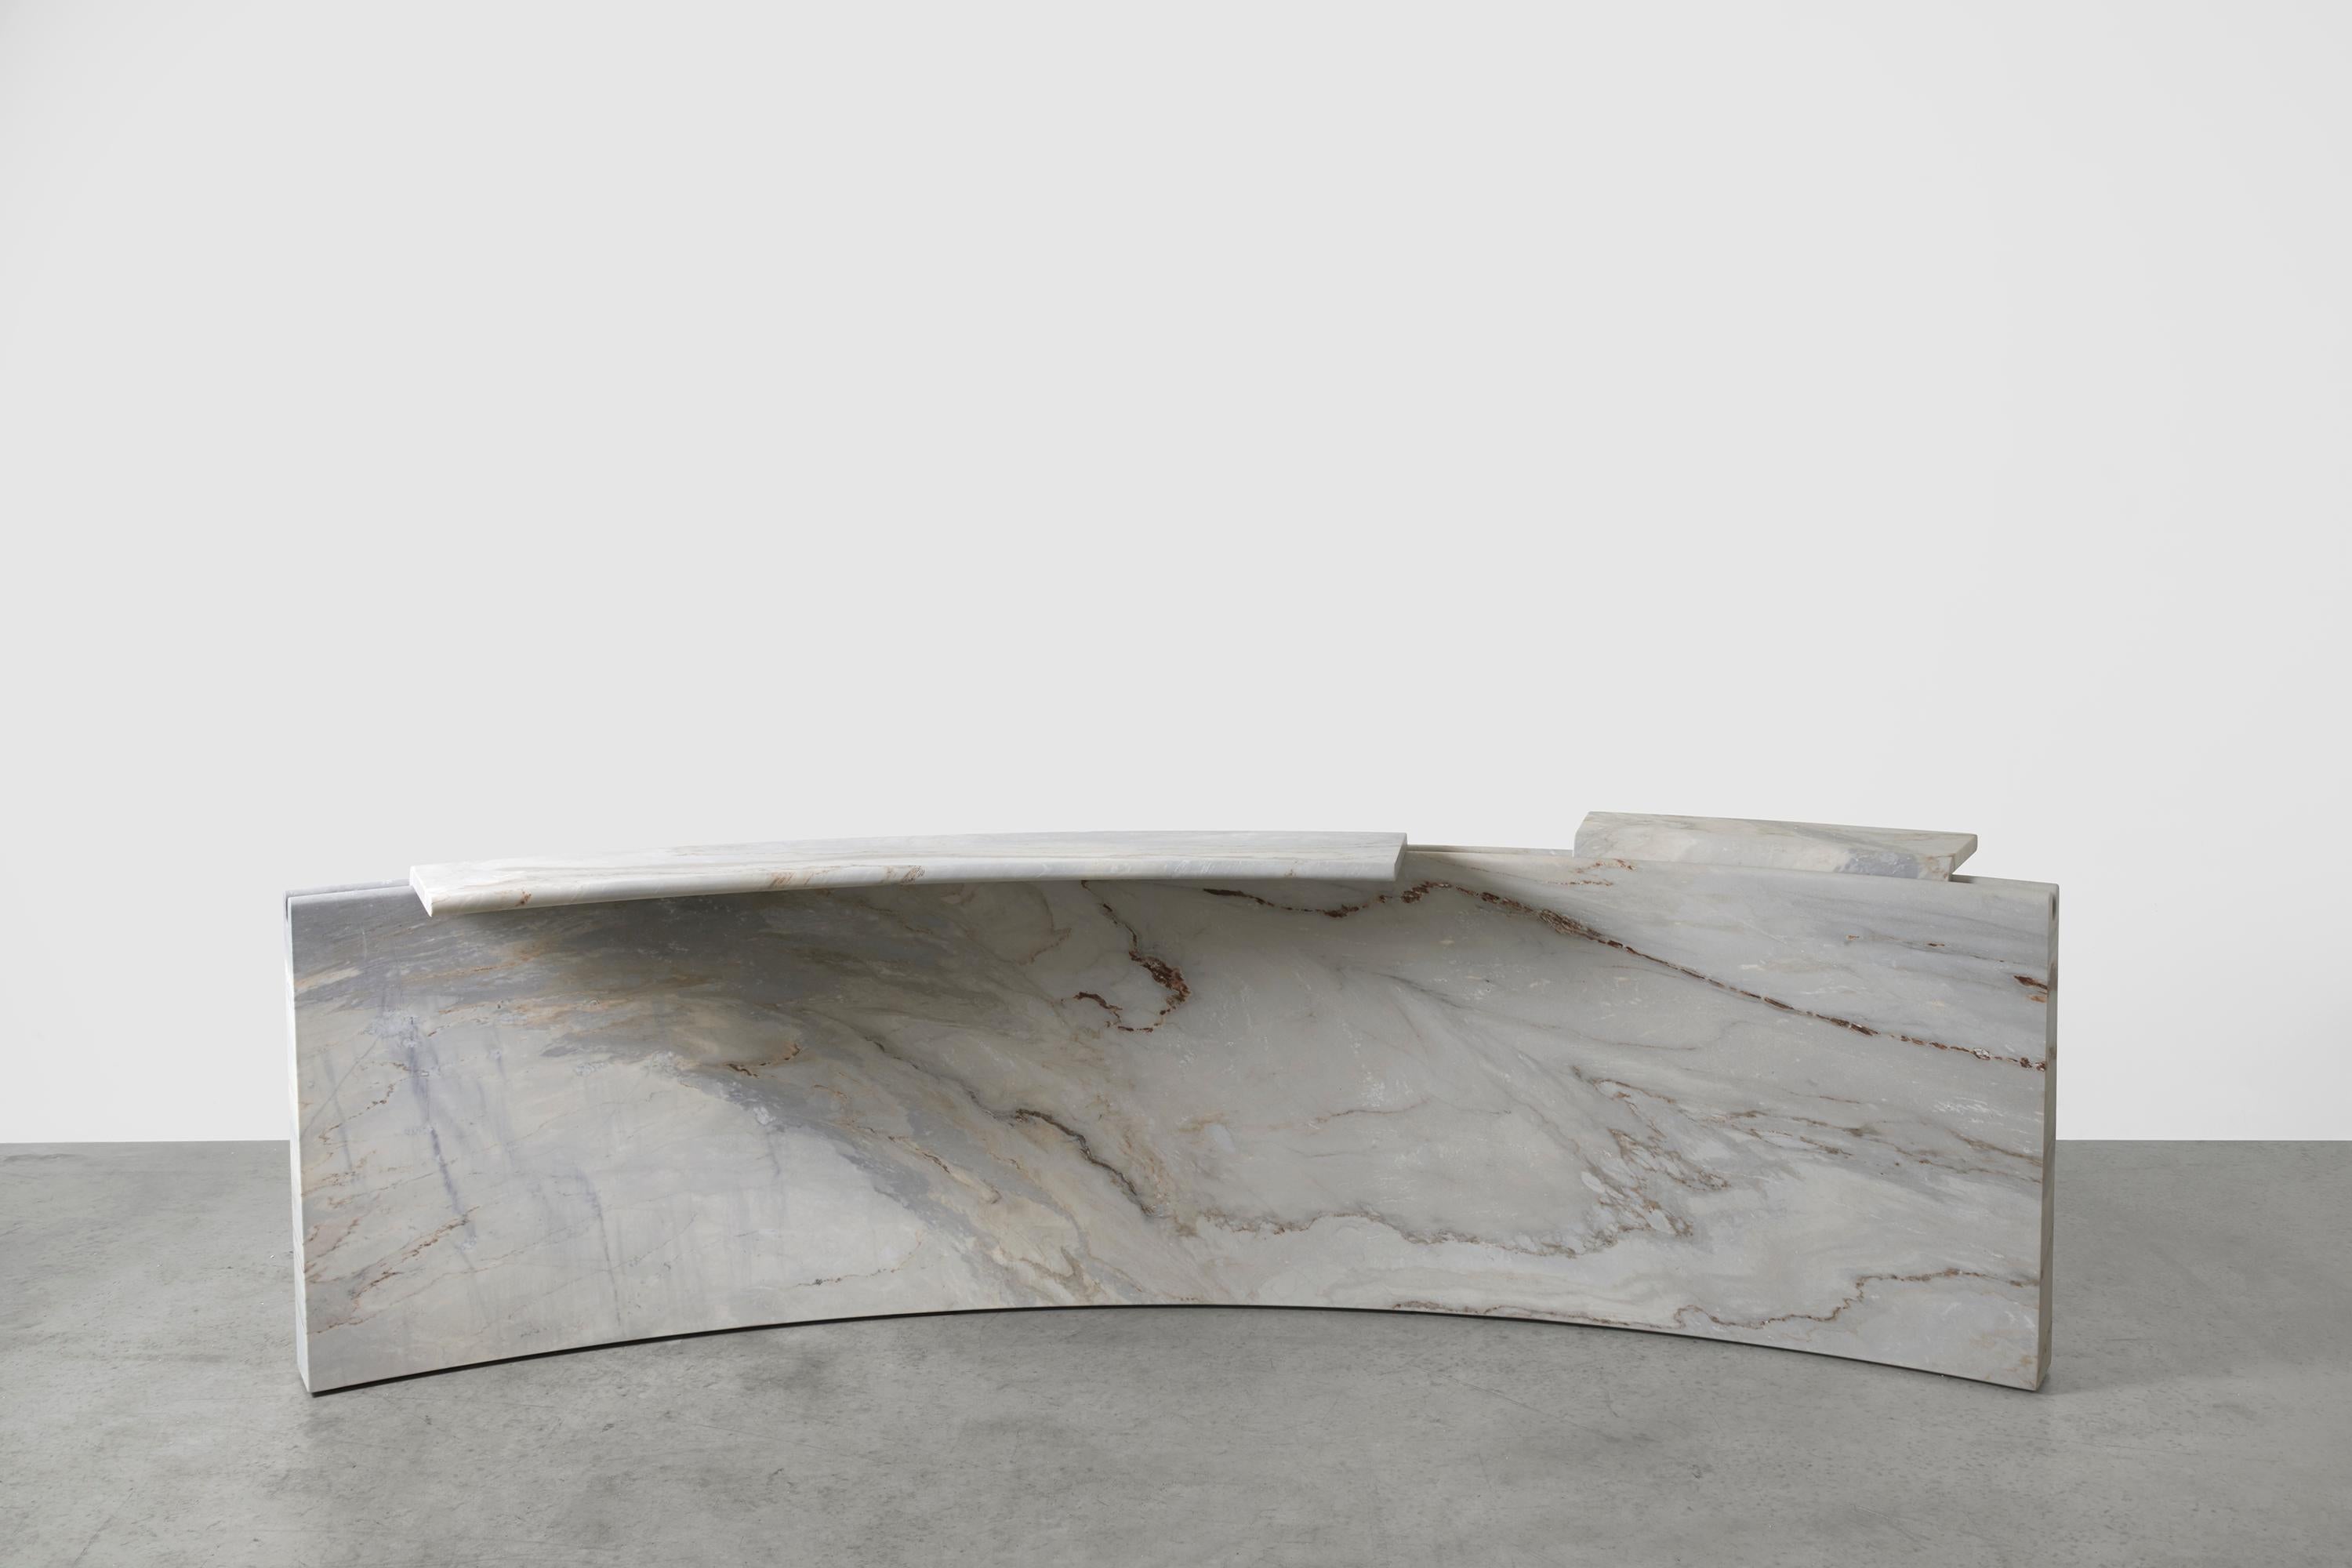 Agglomerati focuses on harnessing the timeless quality of marble by adopting an integrity first approach with each design. The collections are characterised by geometric silhouettes and well-proportioned plains which lend themselves to the rich,